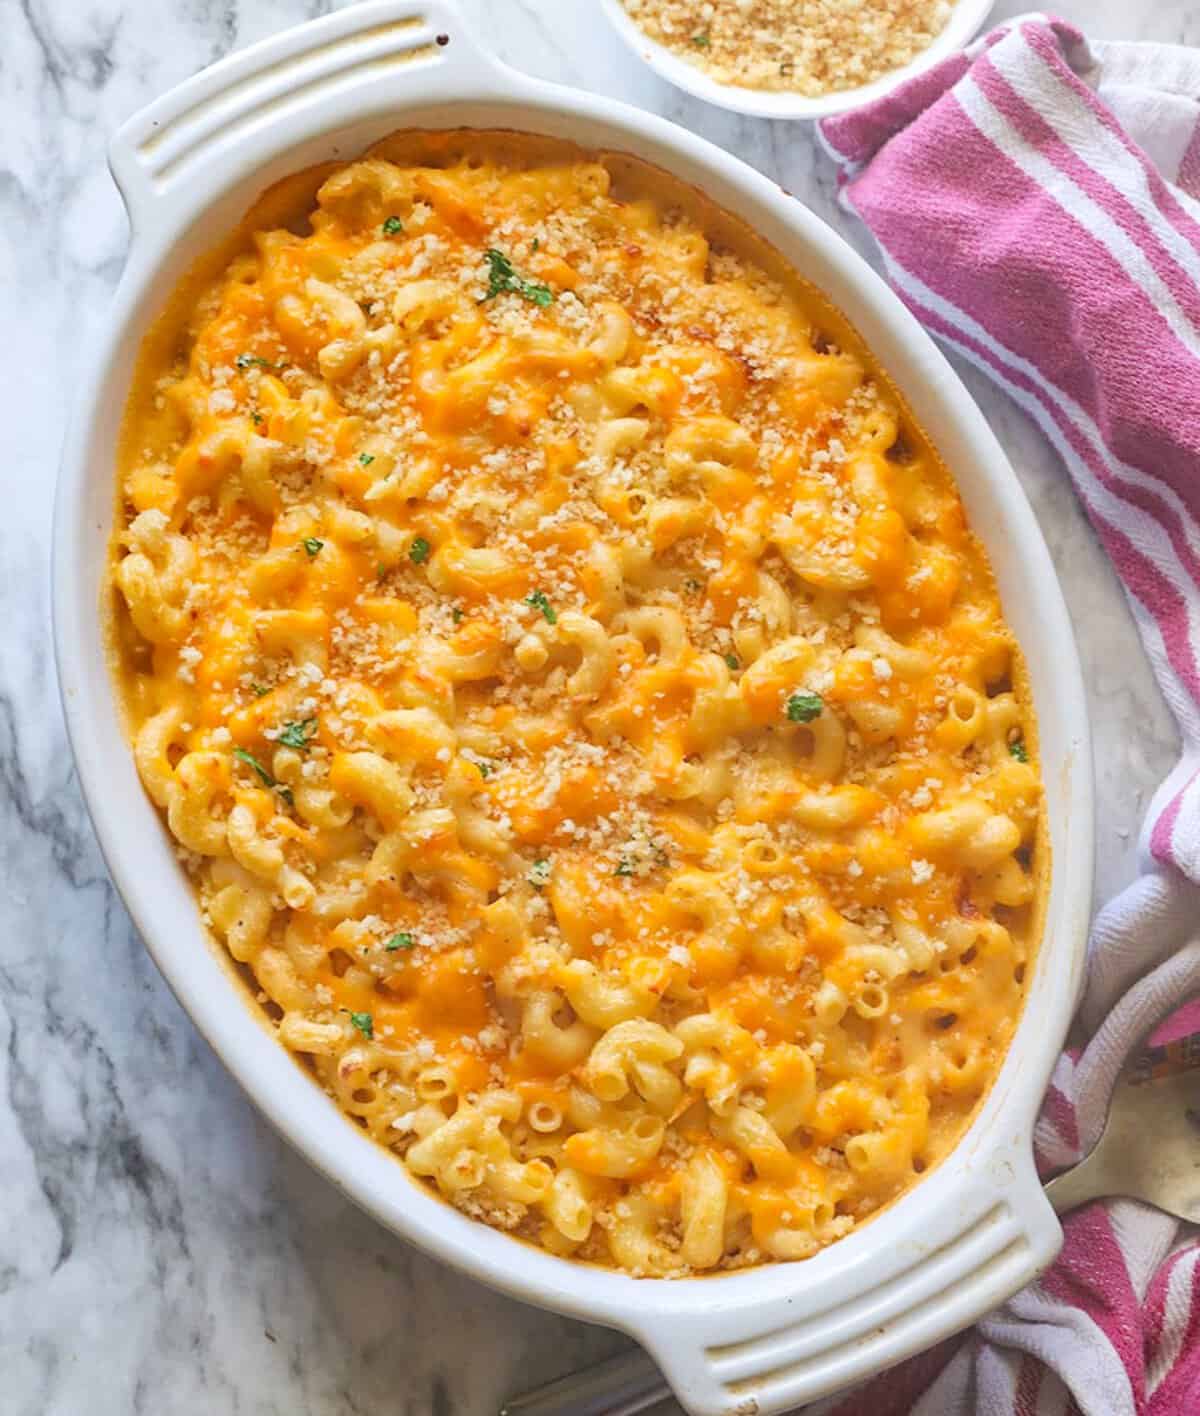 Fresh from the oven Velveeta mac and cheese for an easy Southern classic